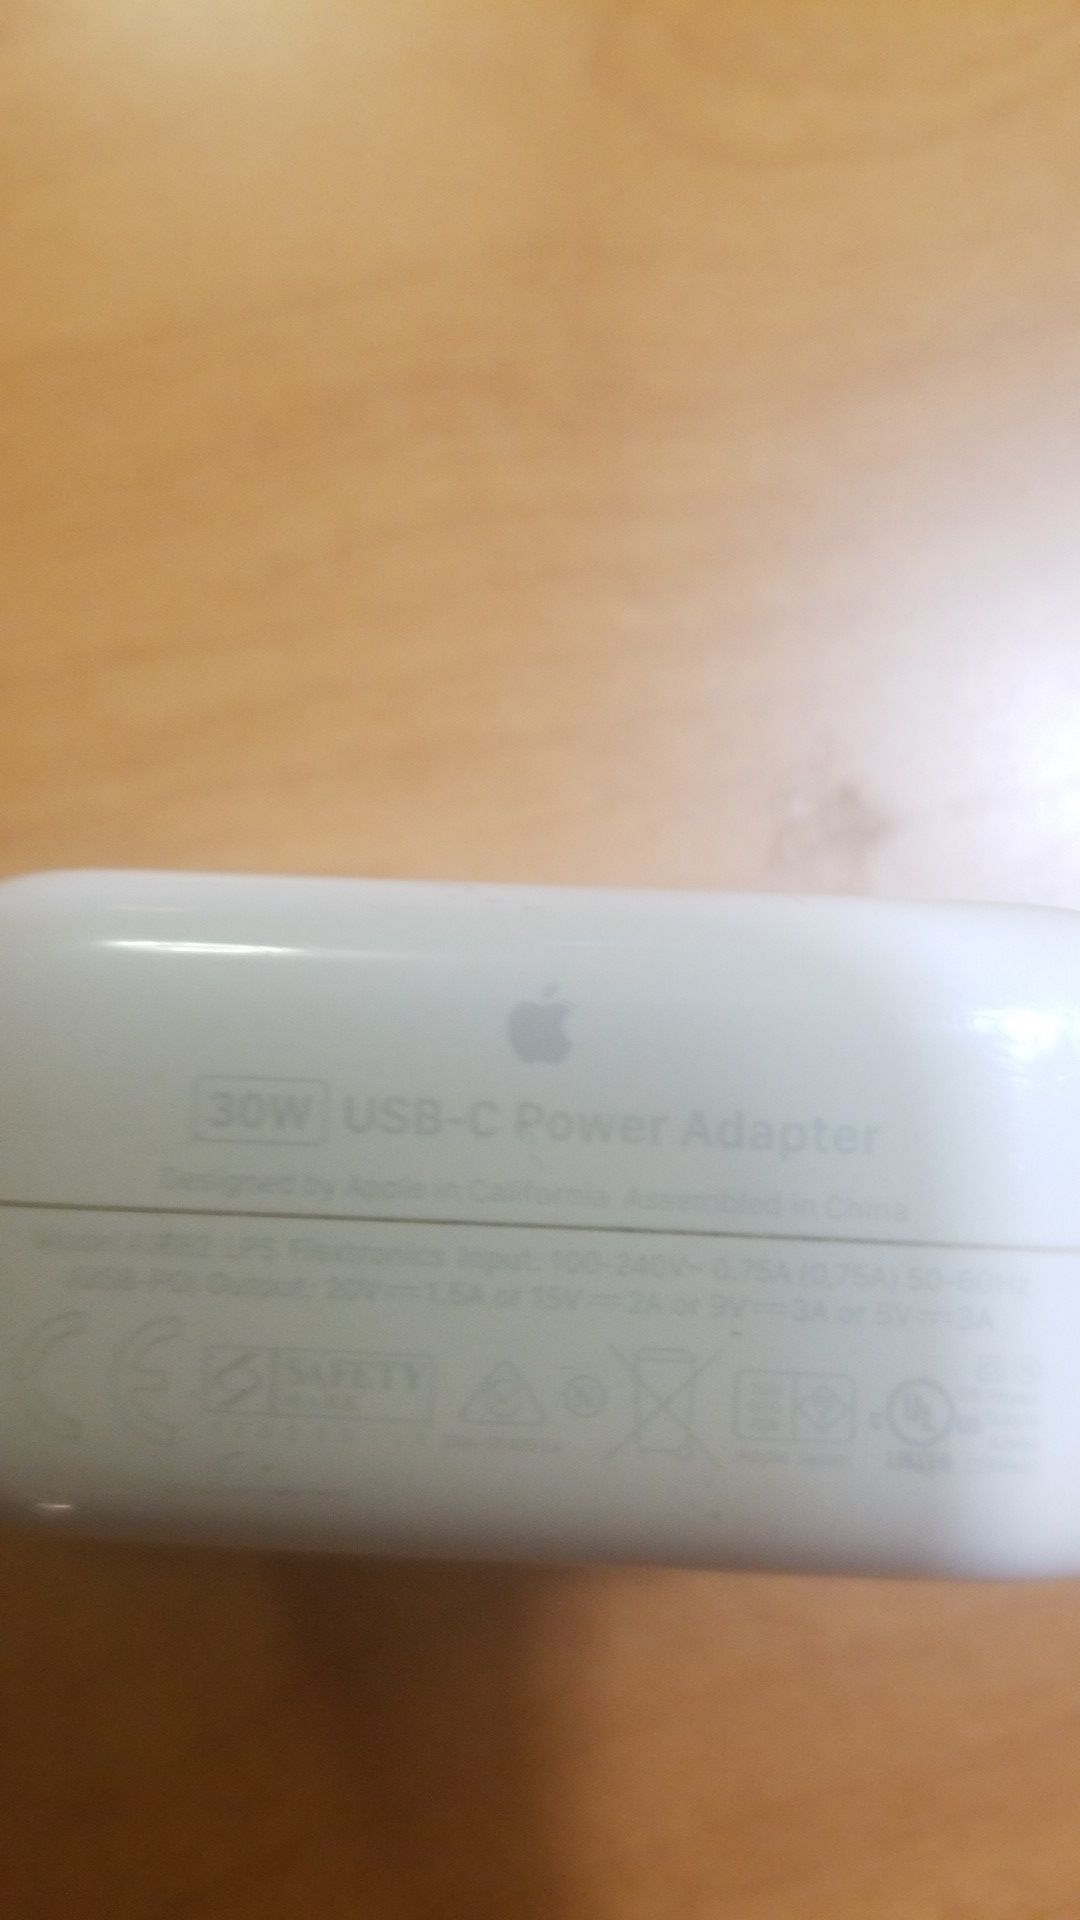 Apple 30w type c charger box